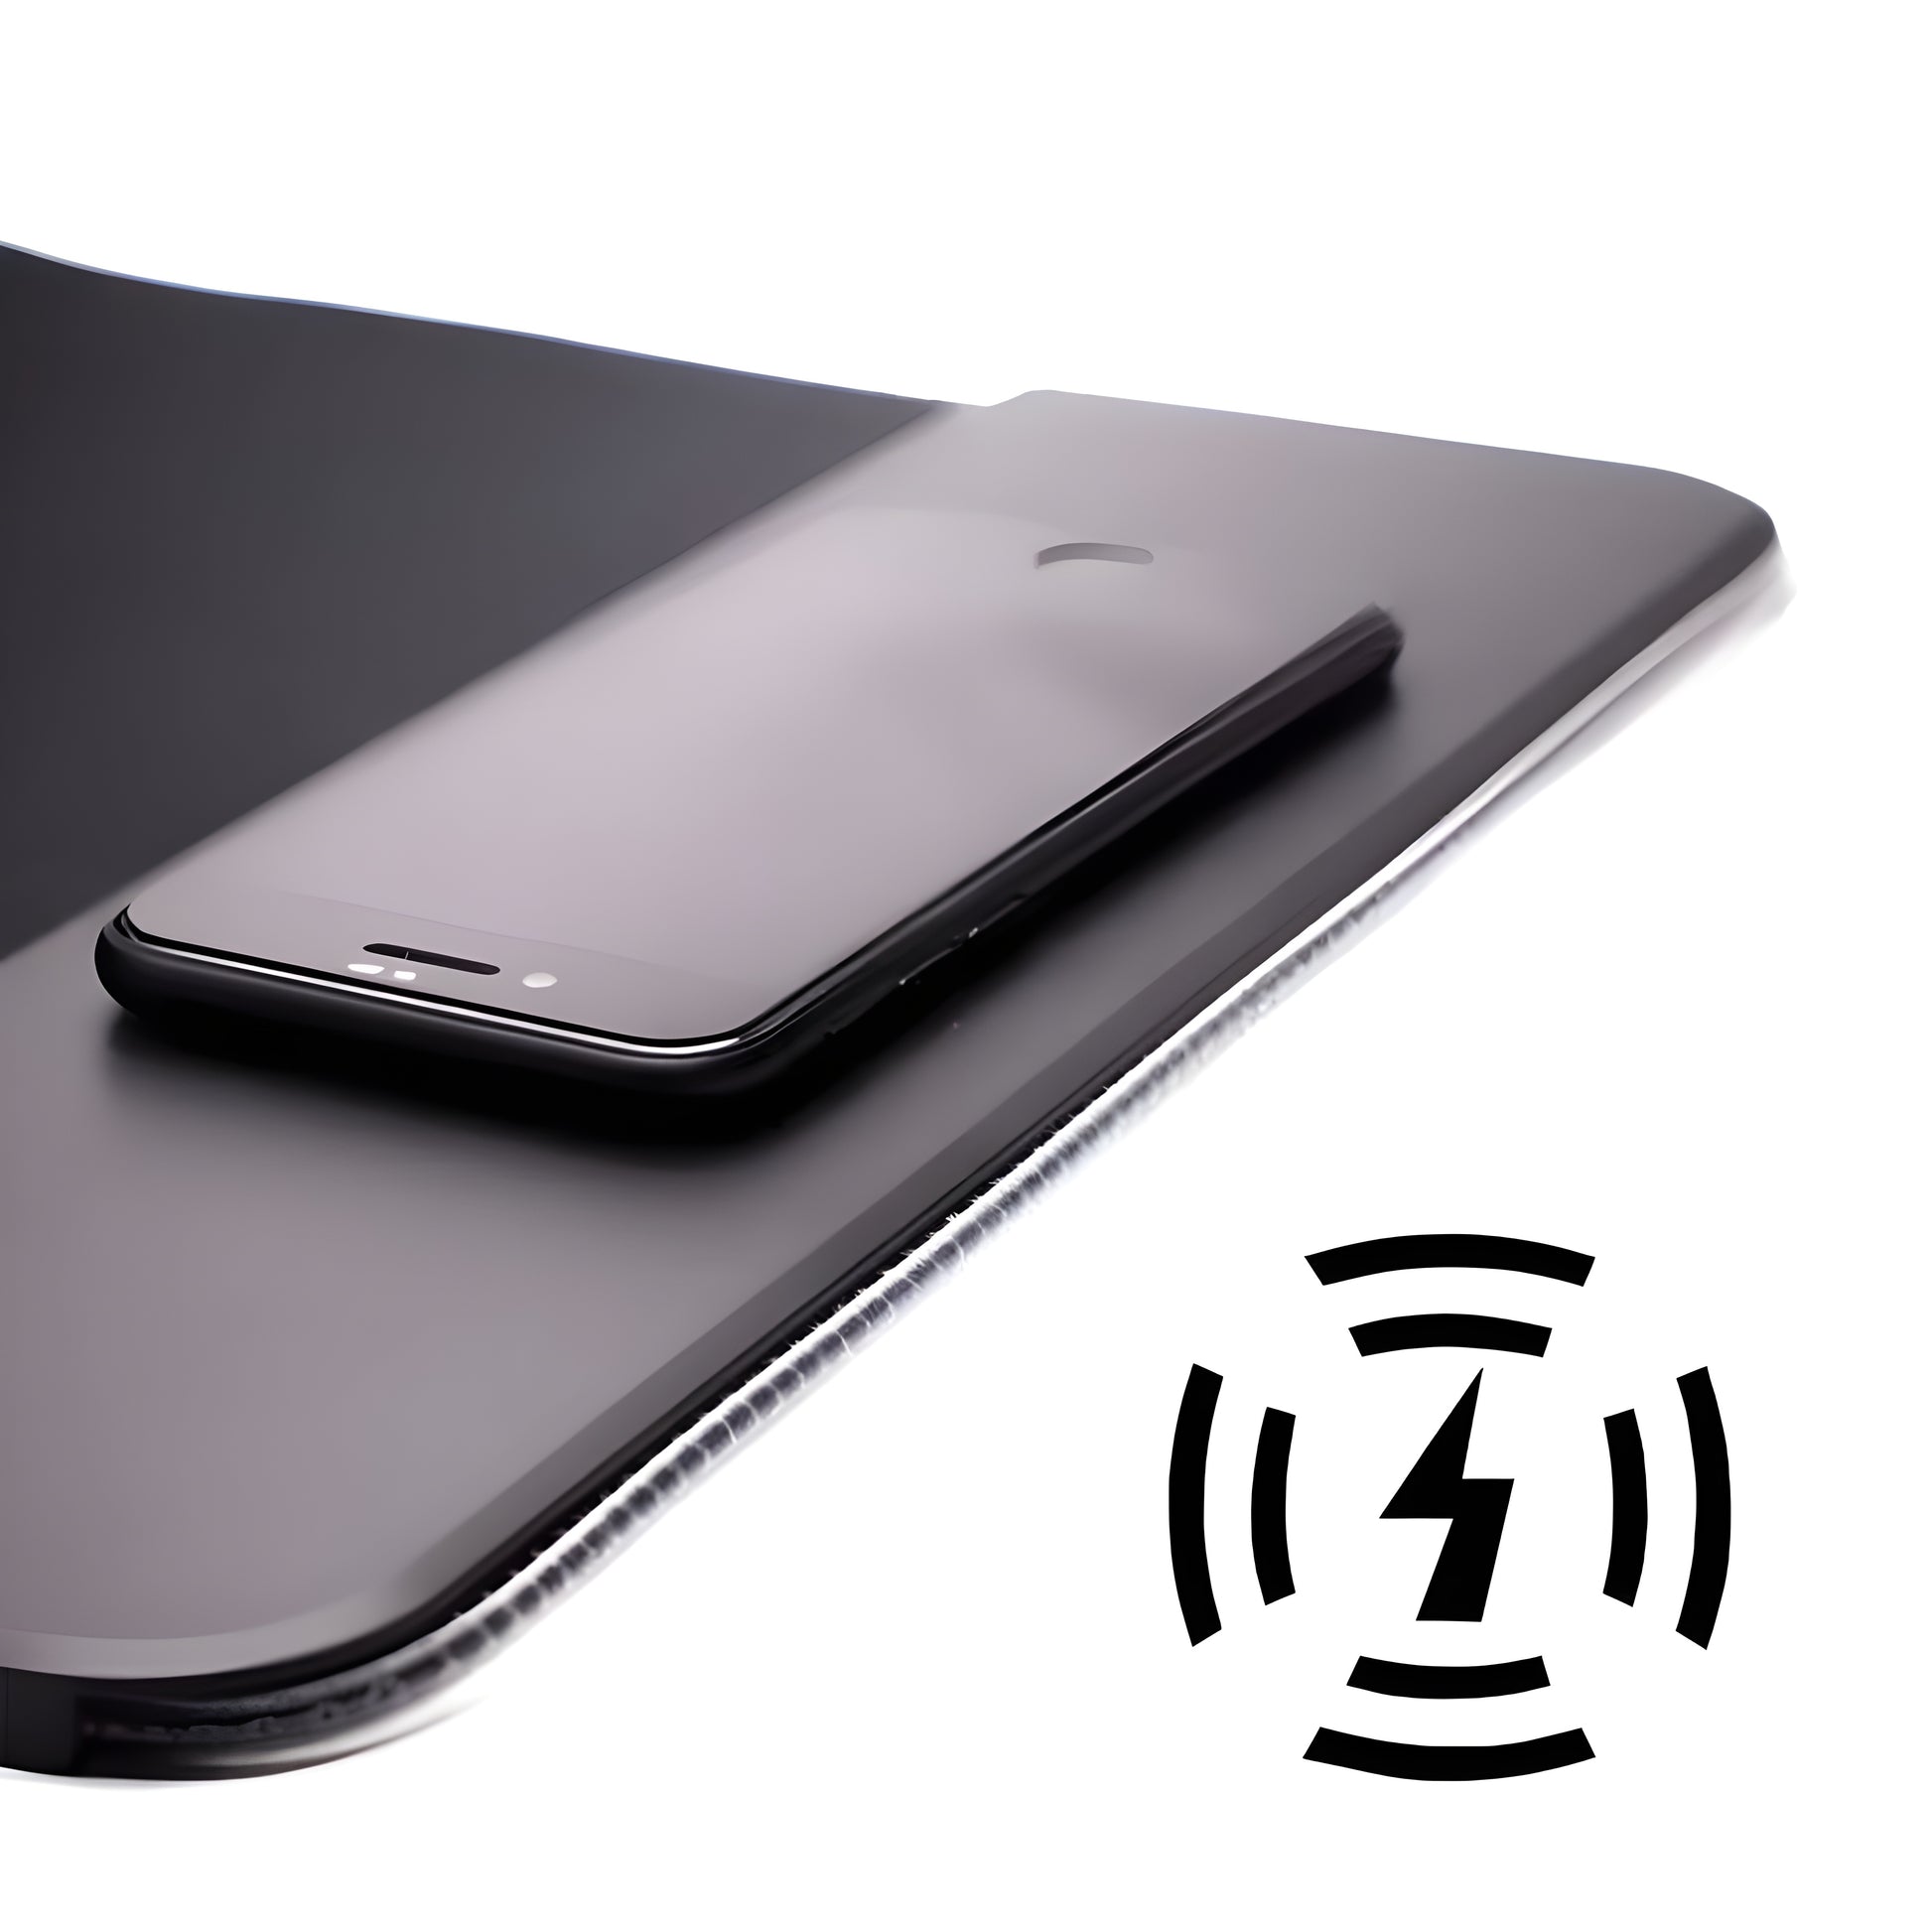 A mobile phone being wirelessly charged on a Clevisco Gaming mousepad which features wireless charging technology